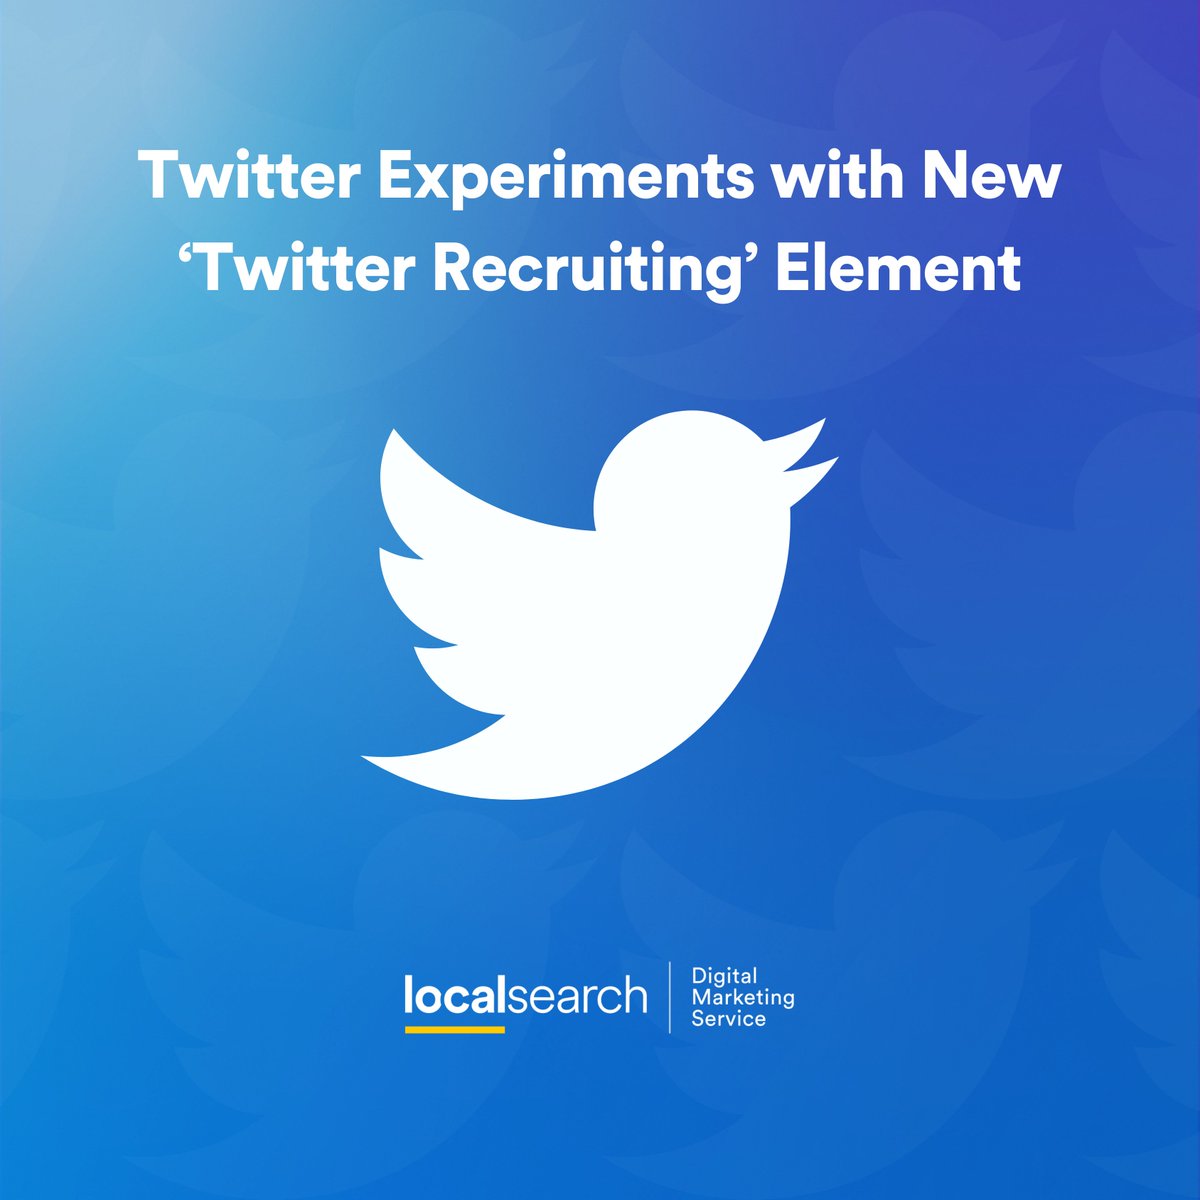 @Twitter is working on 'Twitter Recruiting', a new element that would enable verified organisations to post job openings in the app with a link back to an application page on their website (or third-party provider).

#Recruitment #SocialMediaNews